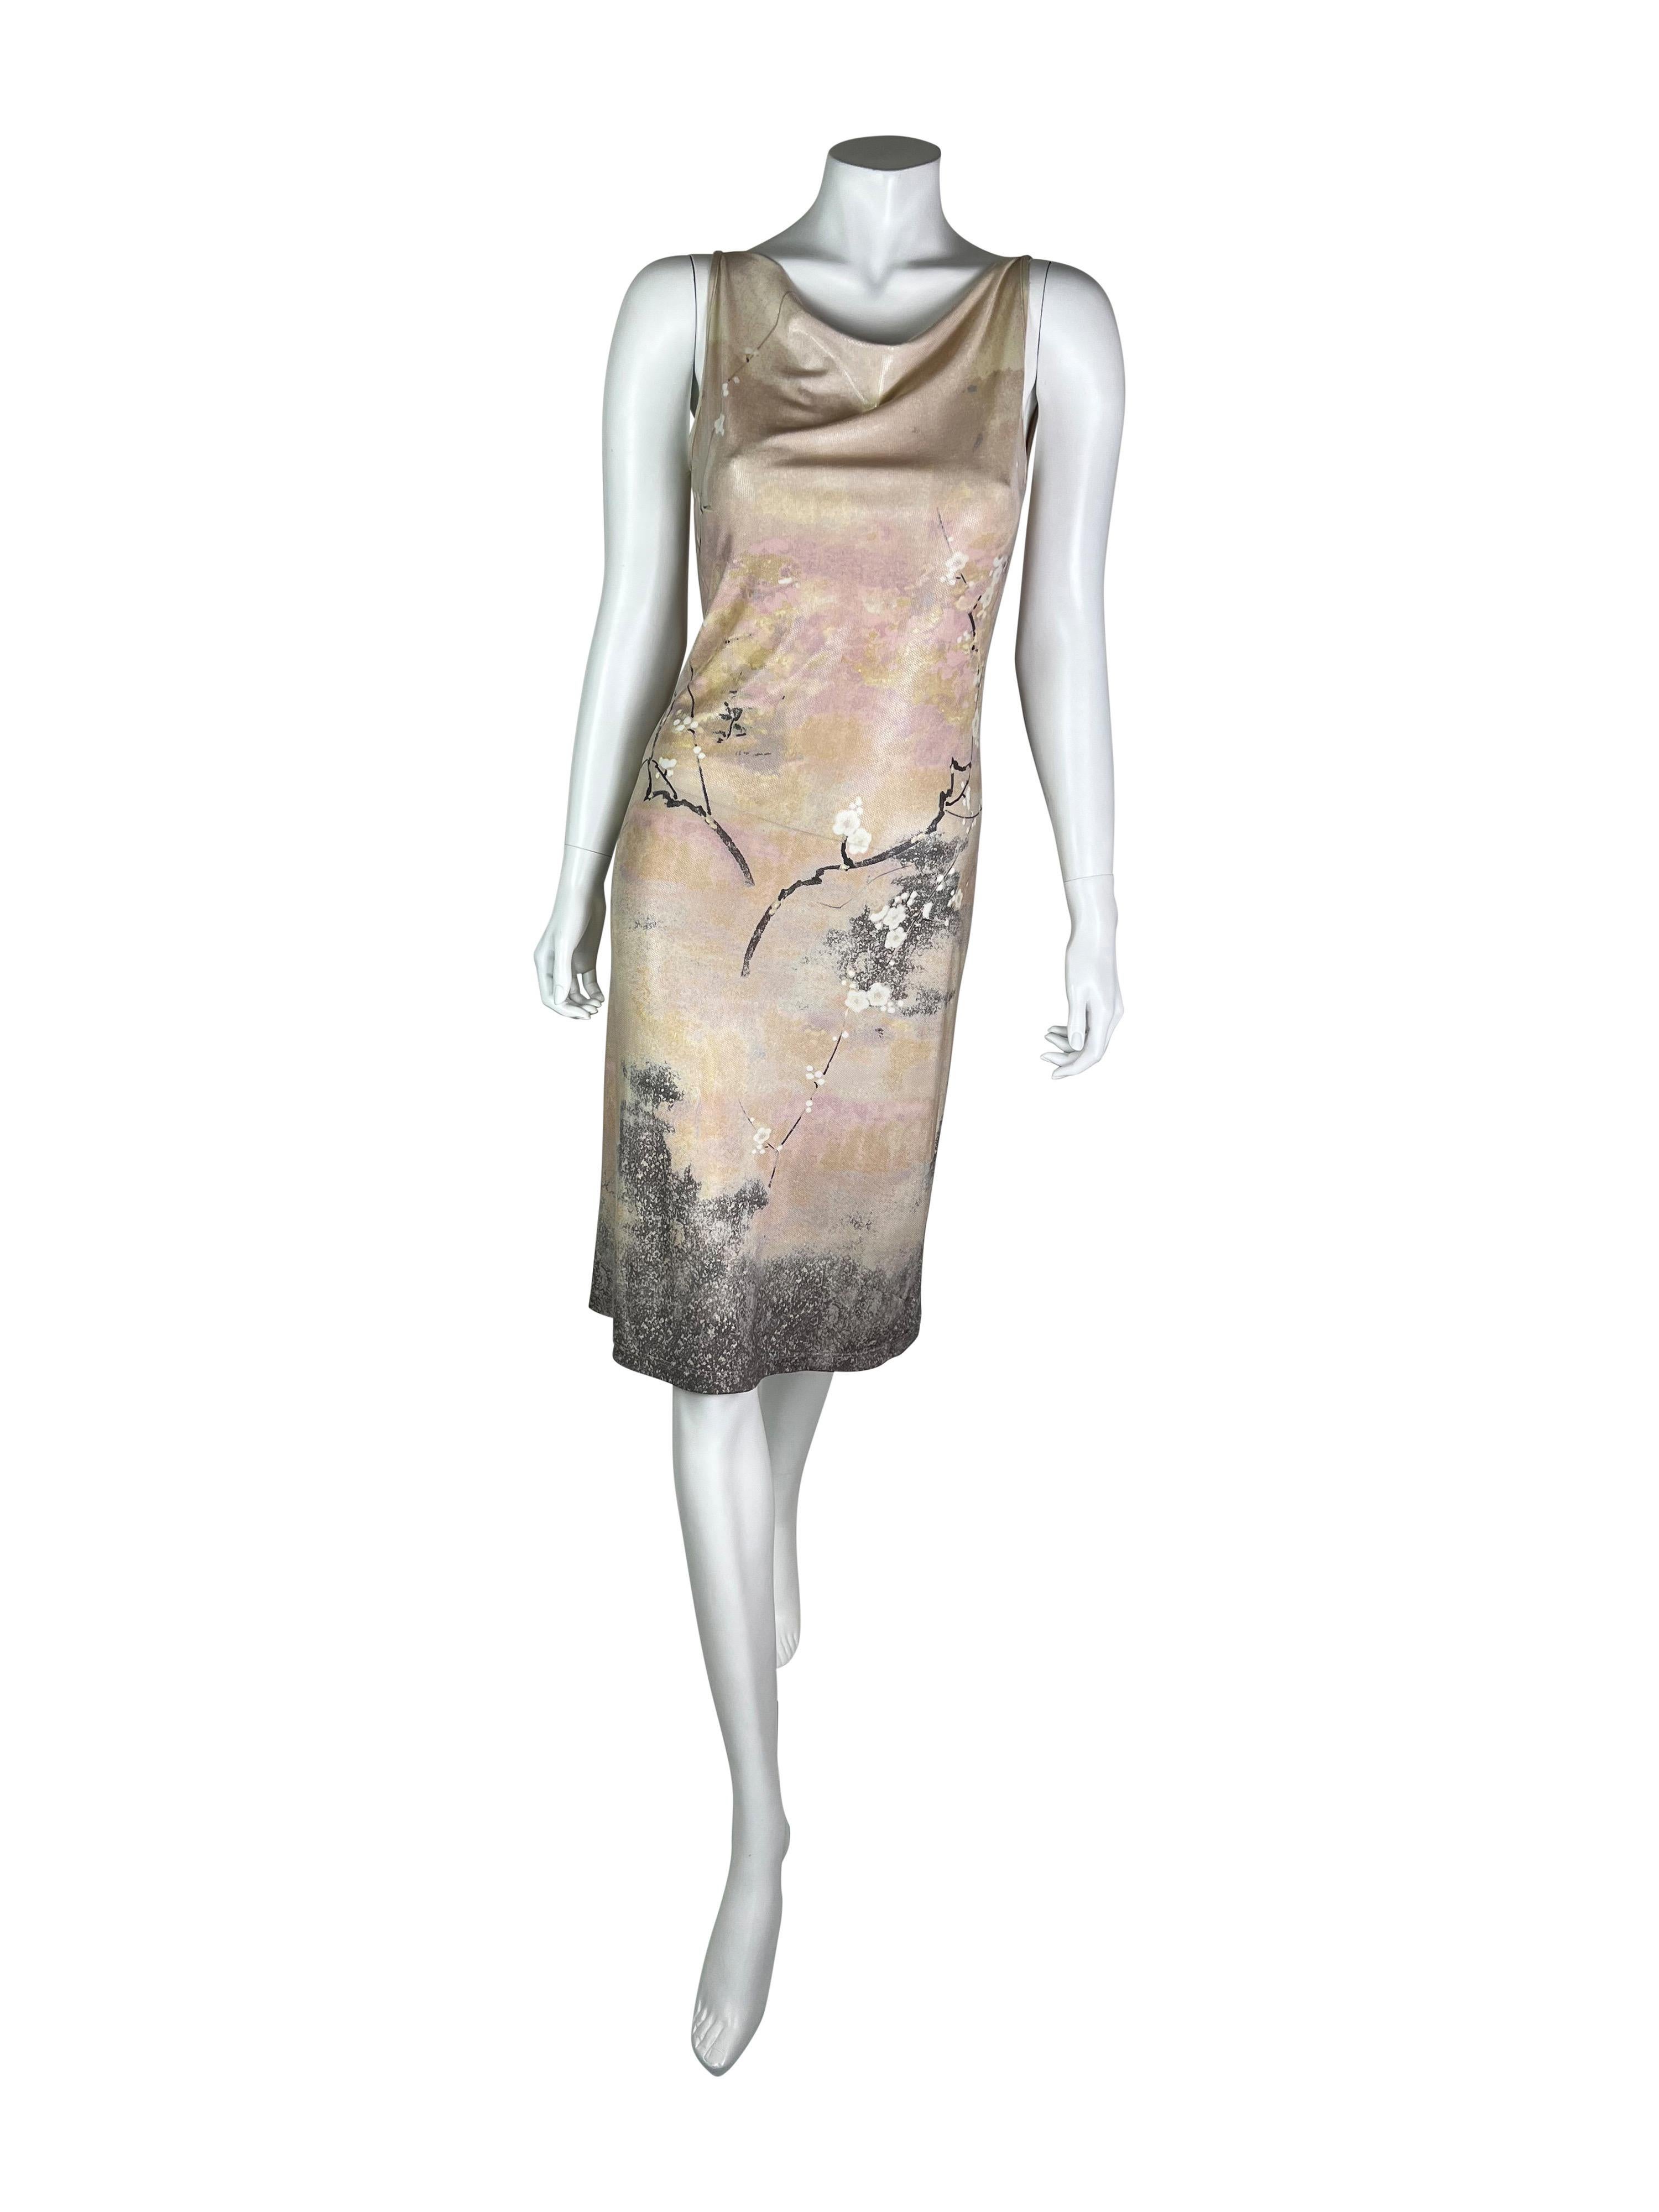 A stunning, super comfortable Roberto Cavalli dress with Sakura Print and a reflective wet look. 

Missing size label, but a dress would fit the best sizes M and L. 

Excellent vintage condition. 